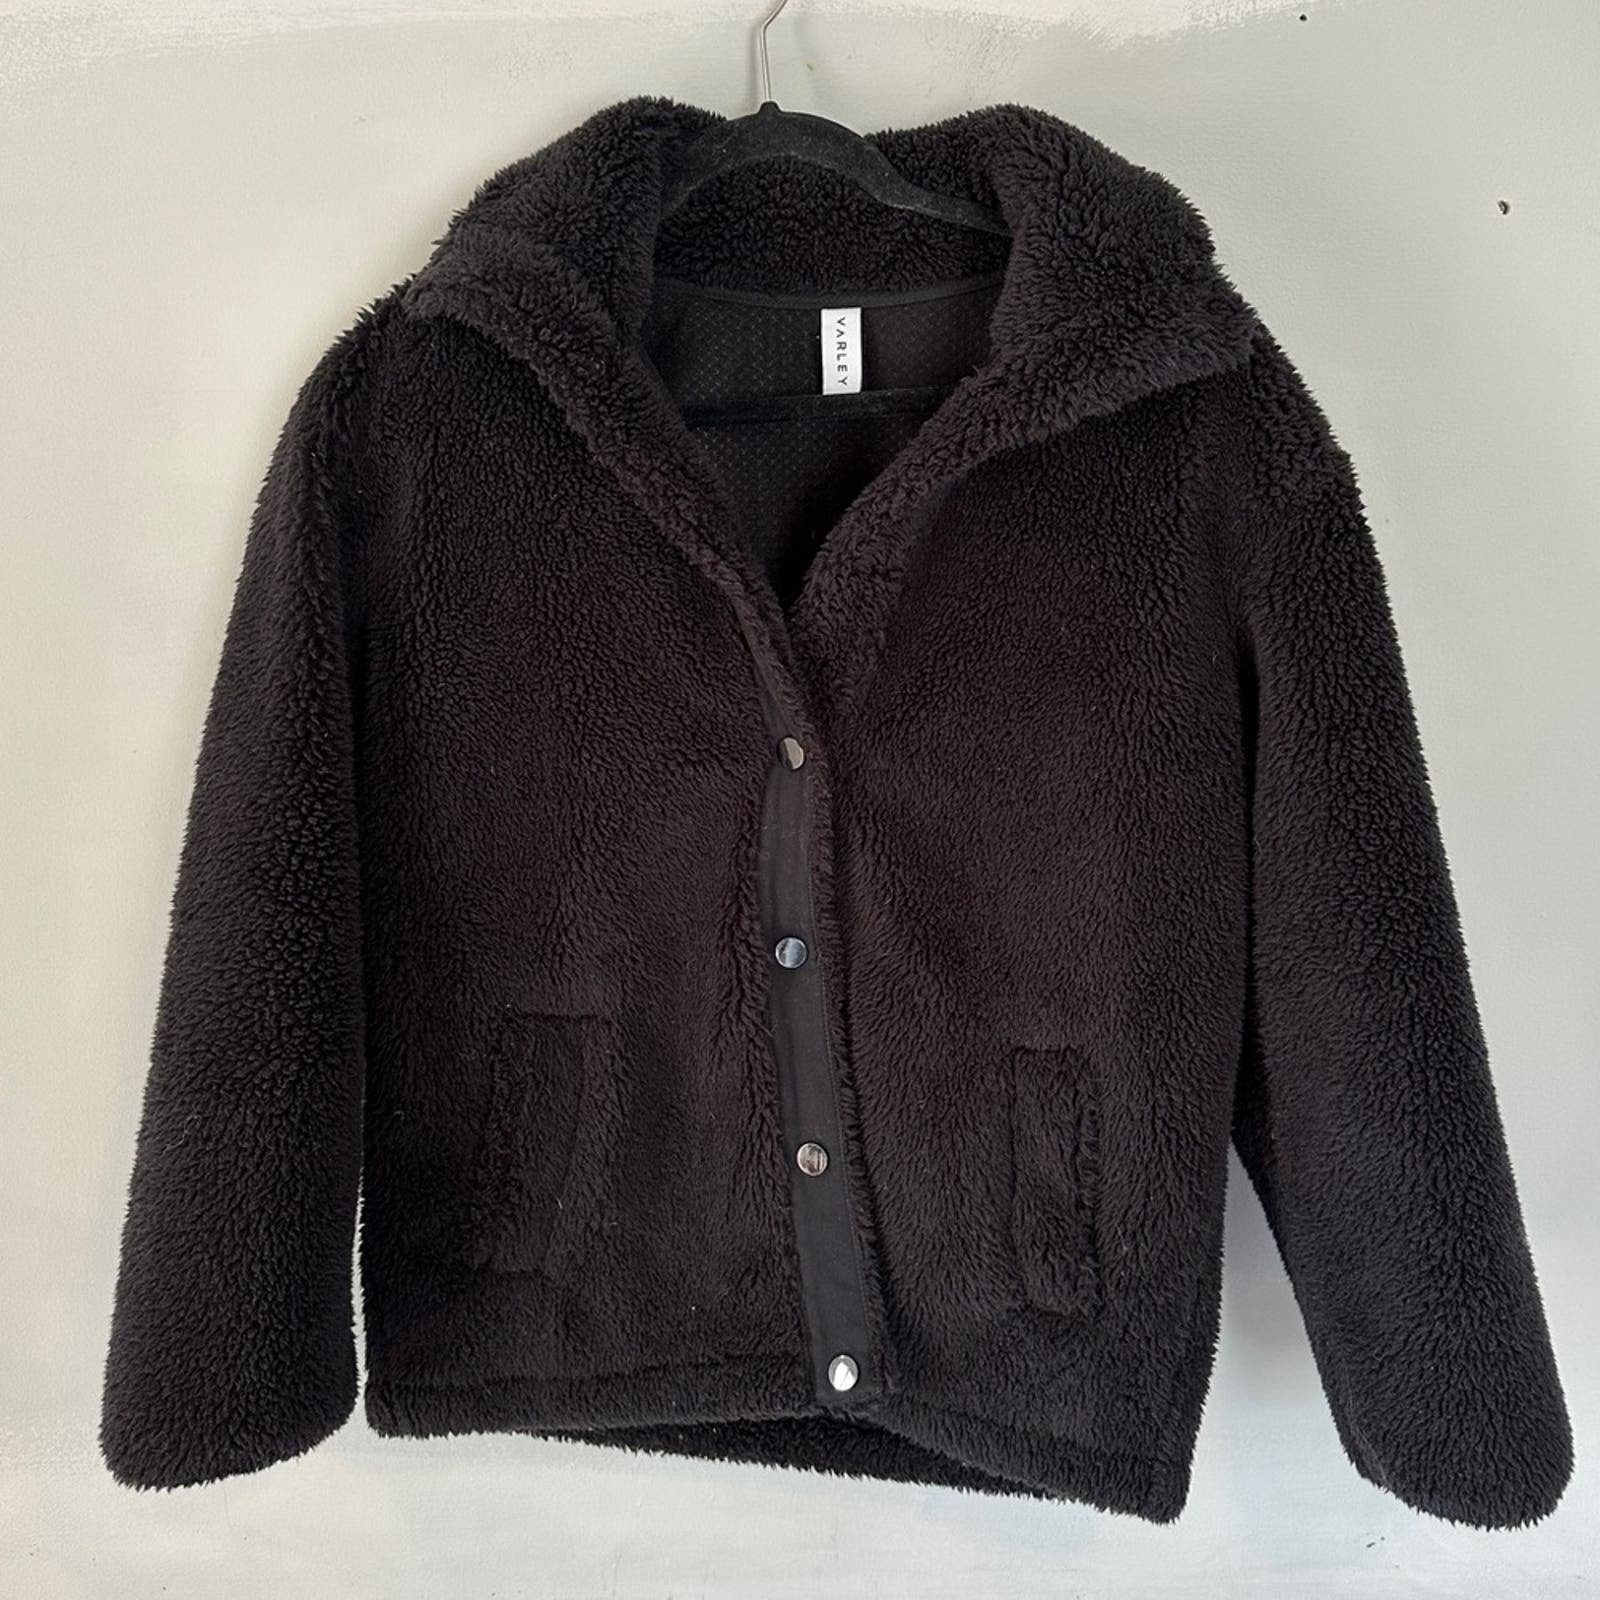 save up to 70% VARLEY Clemson Teddy Jacket Black Sherpa Snap Buttons MIuDvsWqd outlet online shop